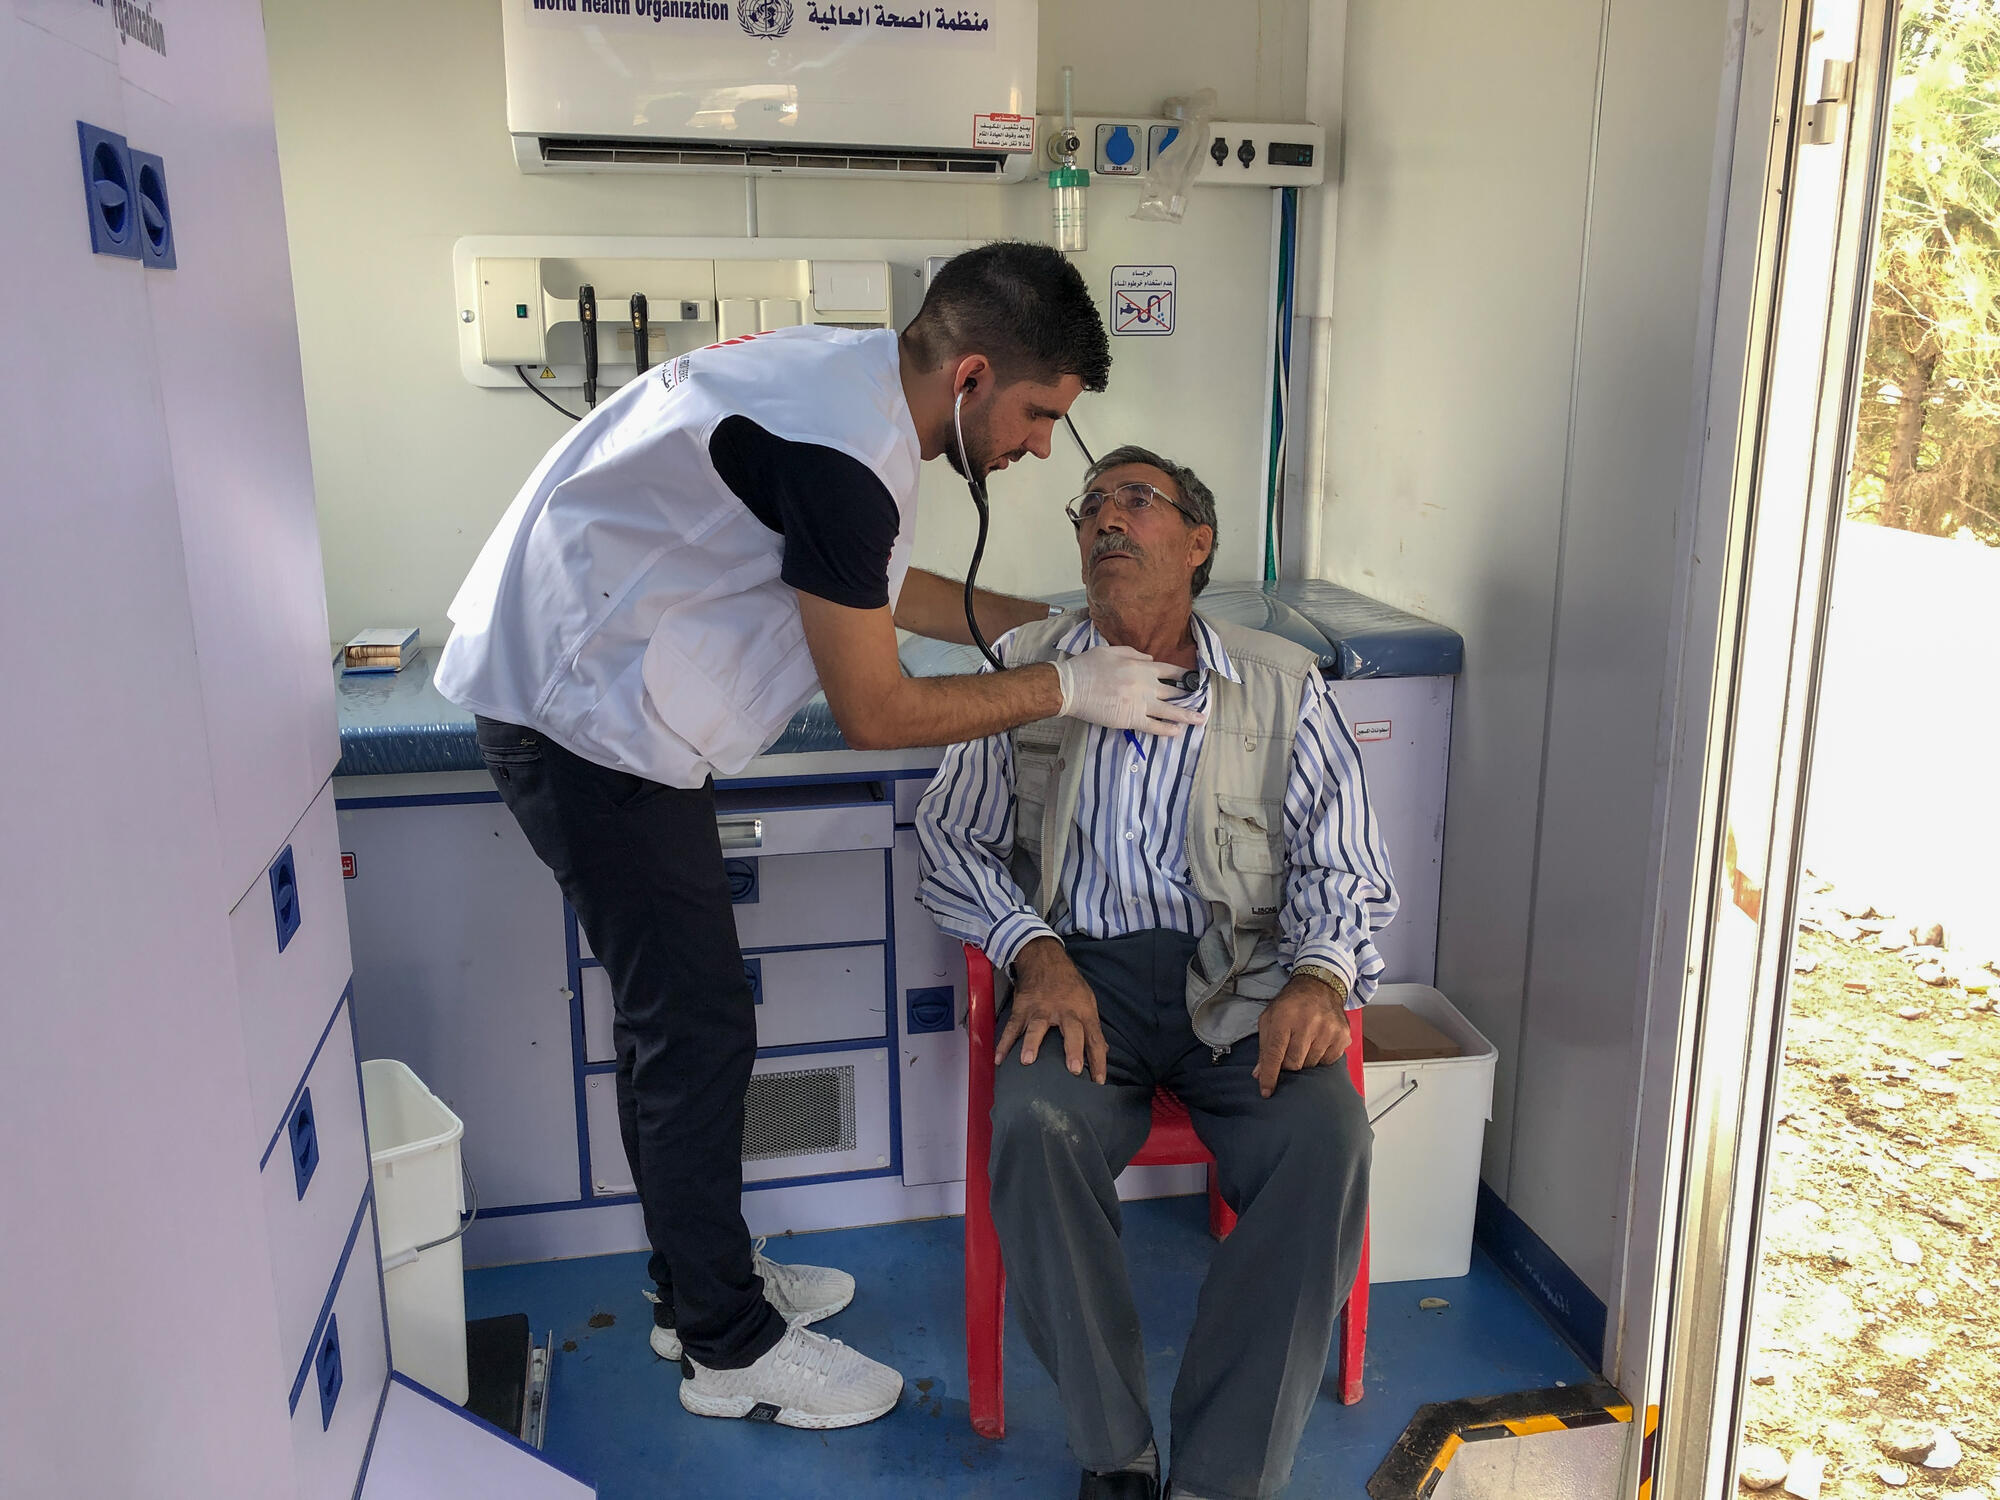 October 2019.As people continue to flee the conflict in northeast Syria, MSF launches medical activities at a site receiving refugees in Iraq close to the border with Syria. ©MSF/Hassan Kamal Al-Deen